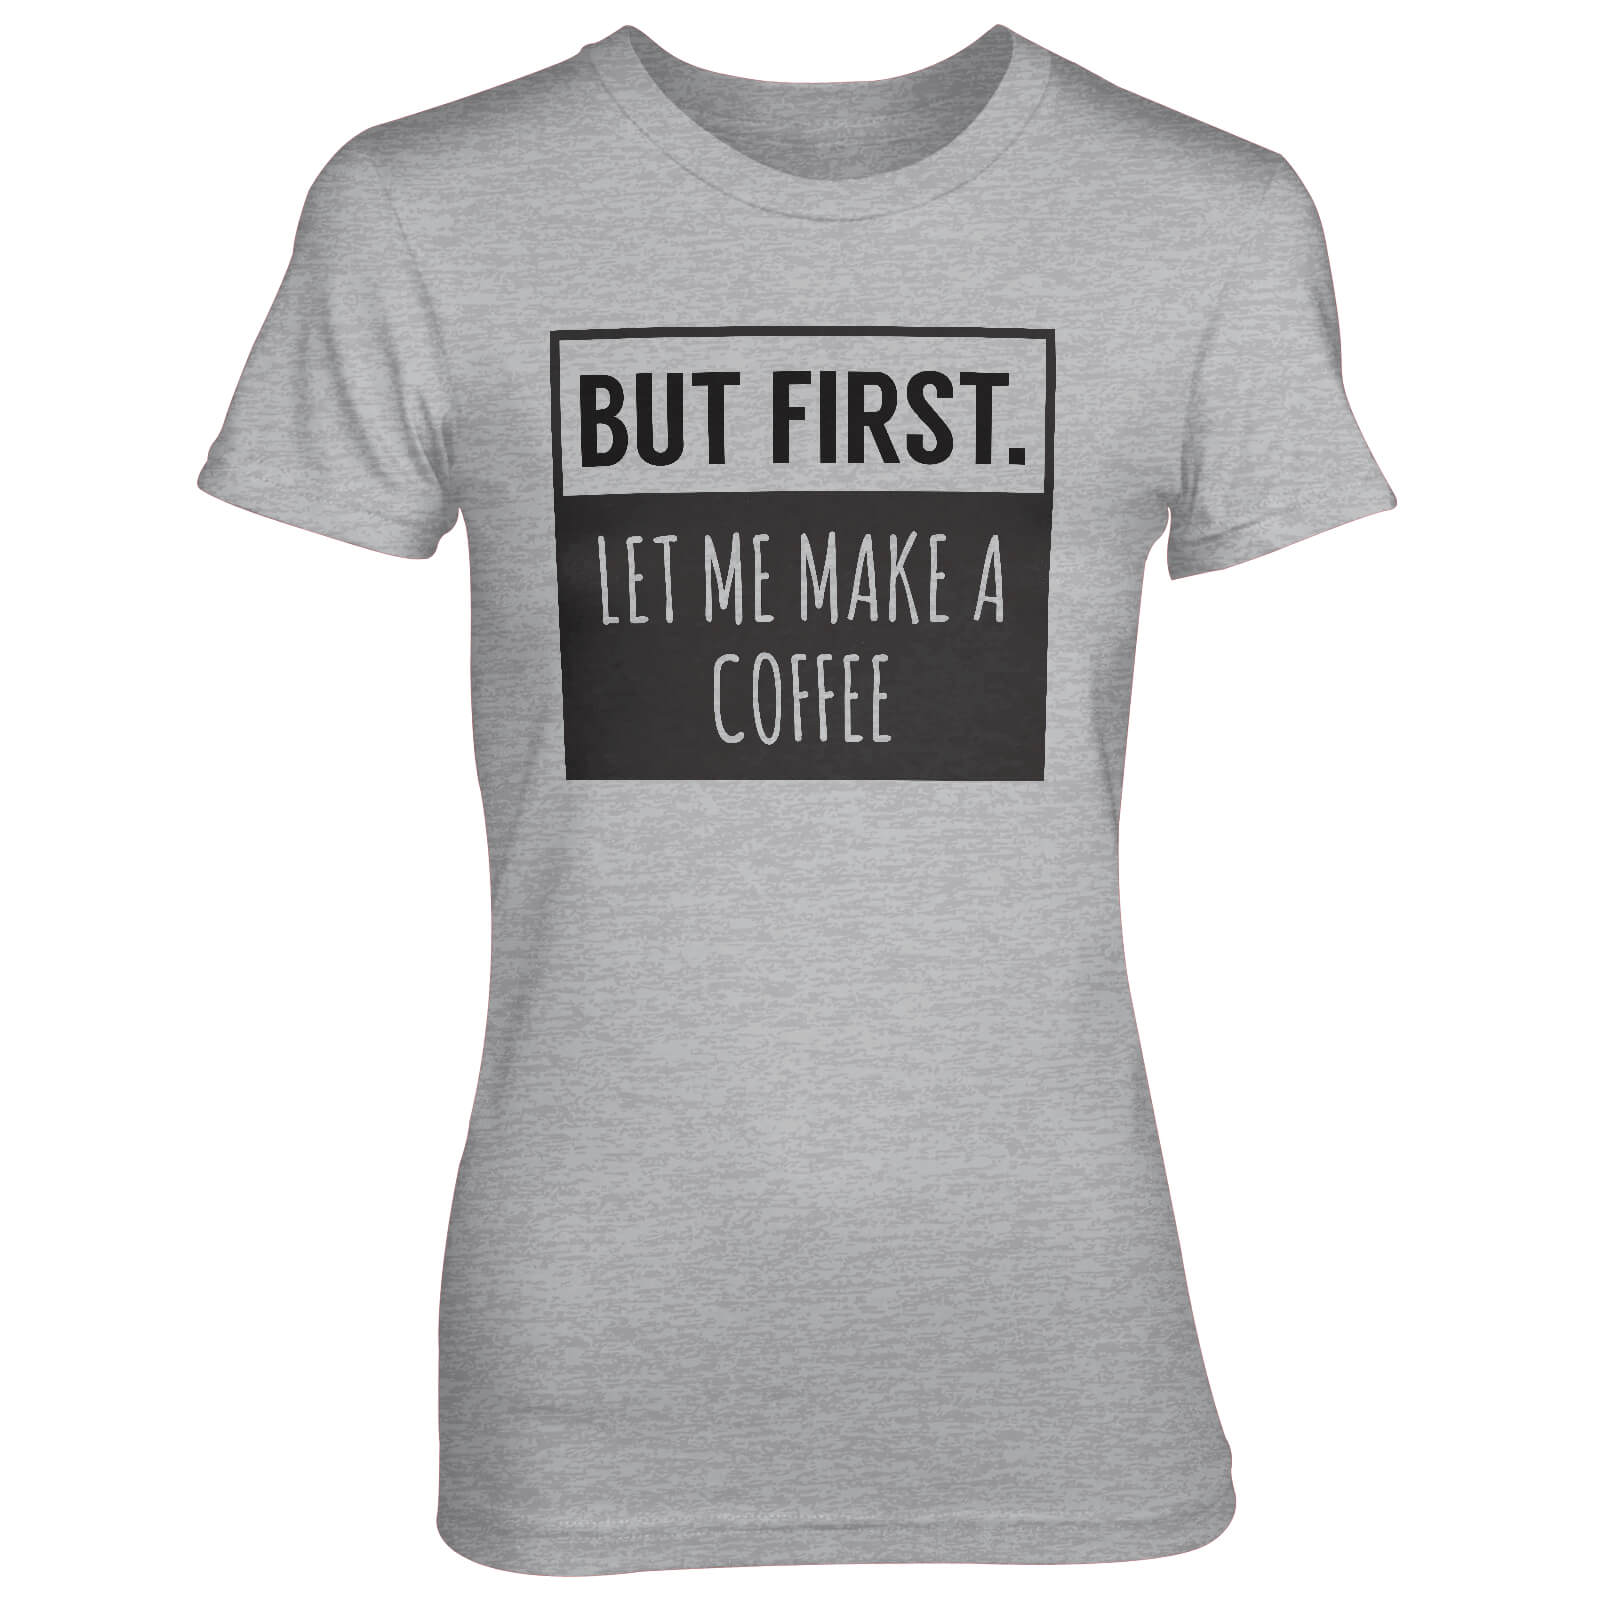 But First Let Me Make A Coffee Women's Grey T-Shirt - S - Grey